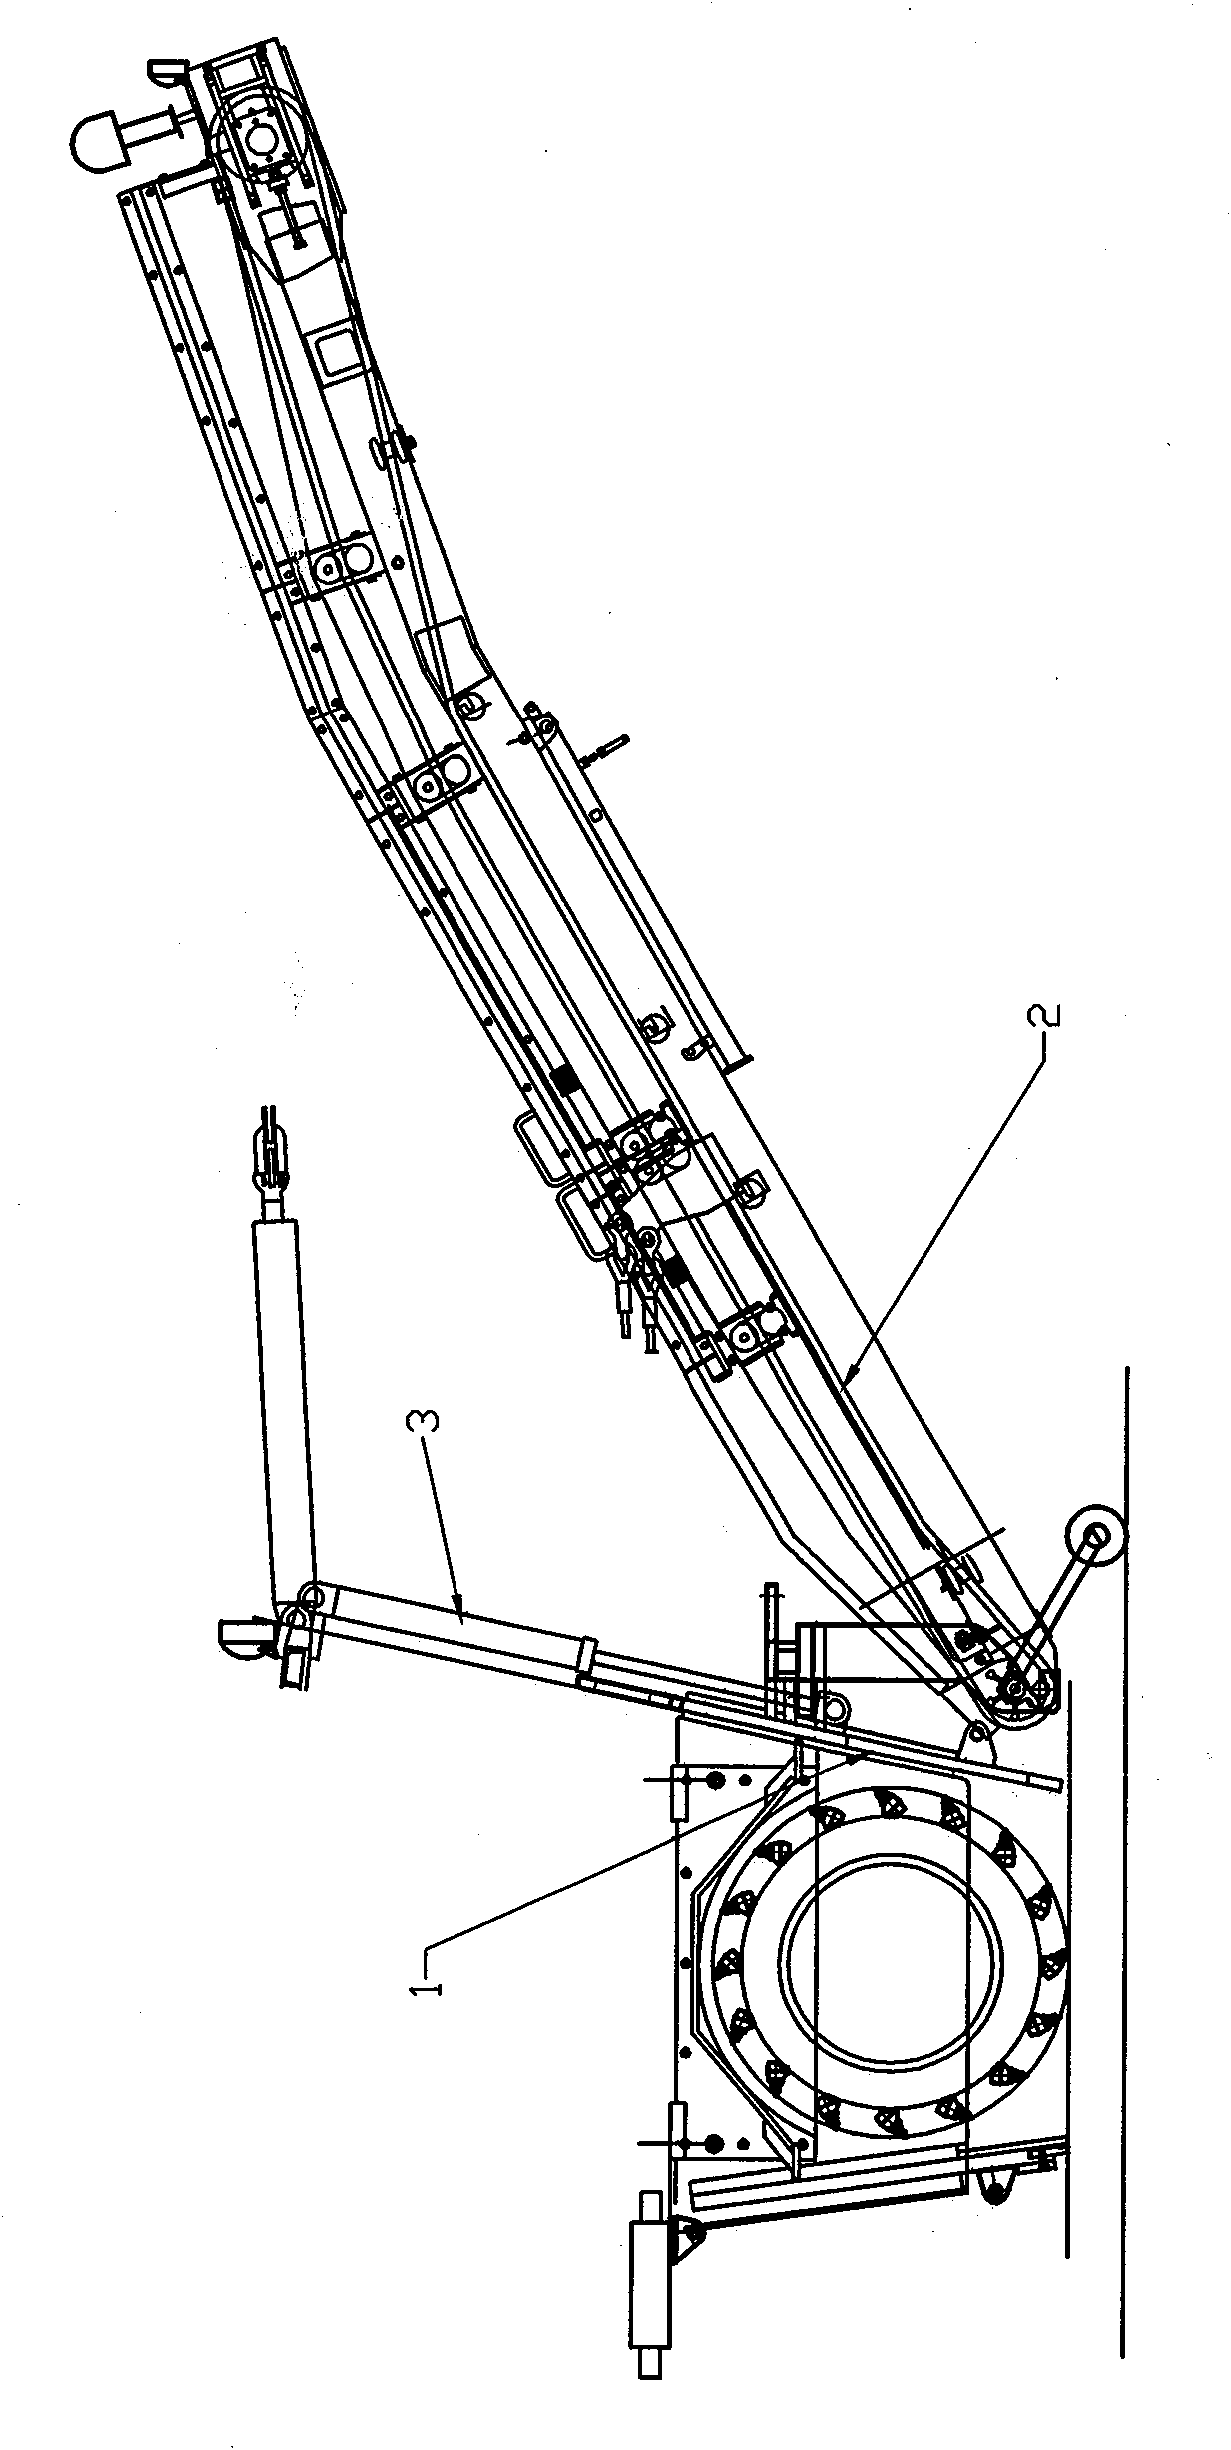 Device for adaptive control of ground clearance of front discharge door of pavement milling machine